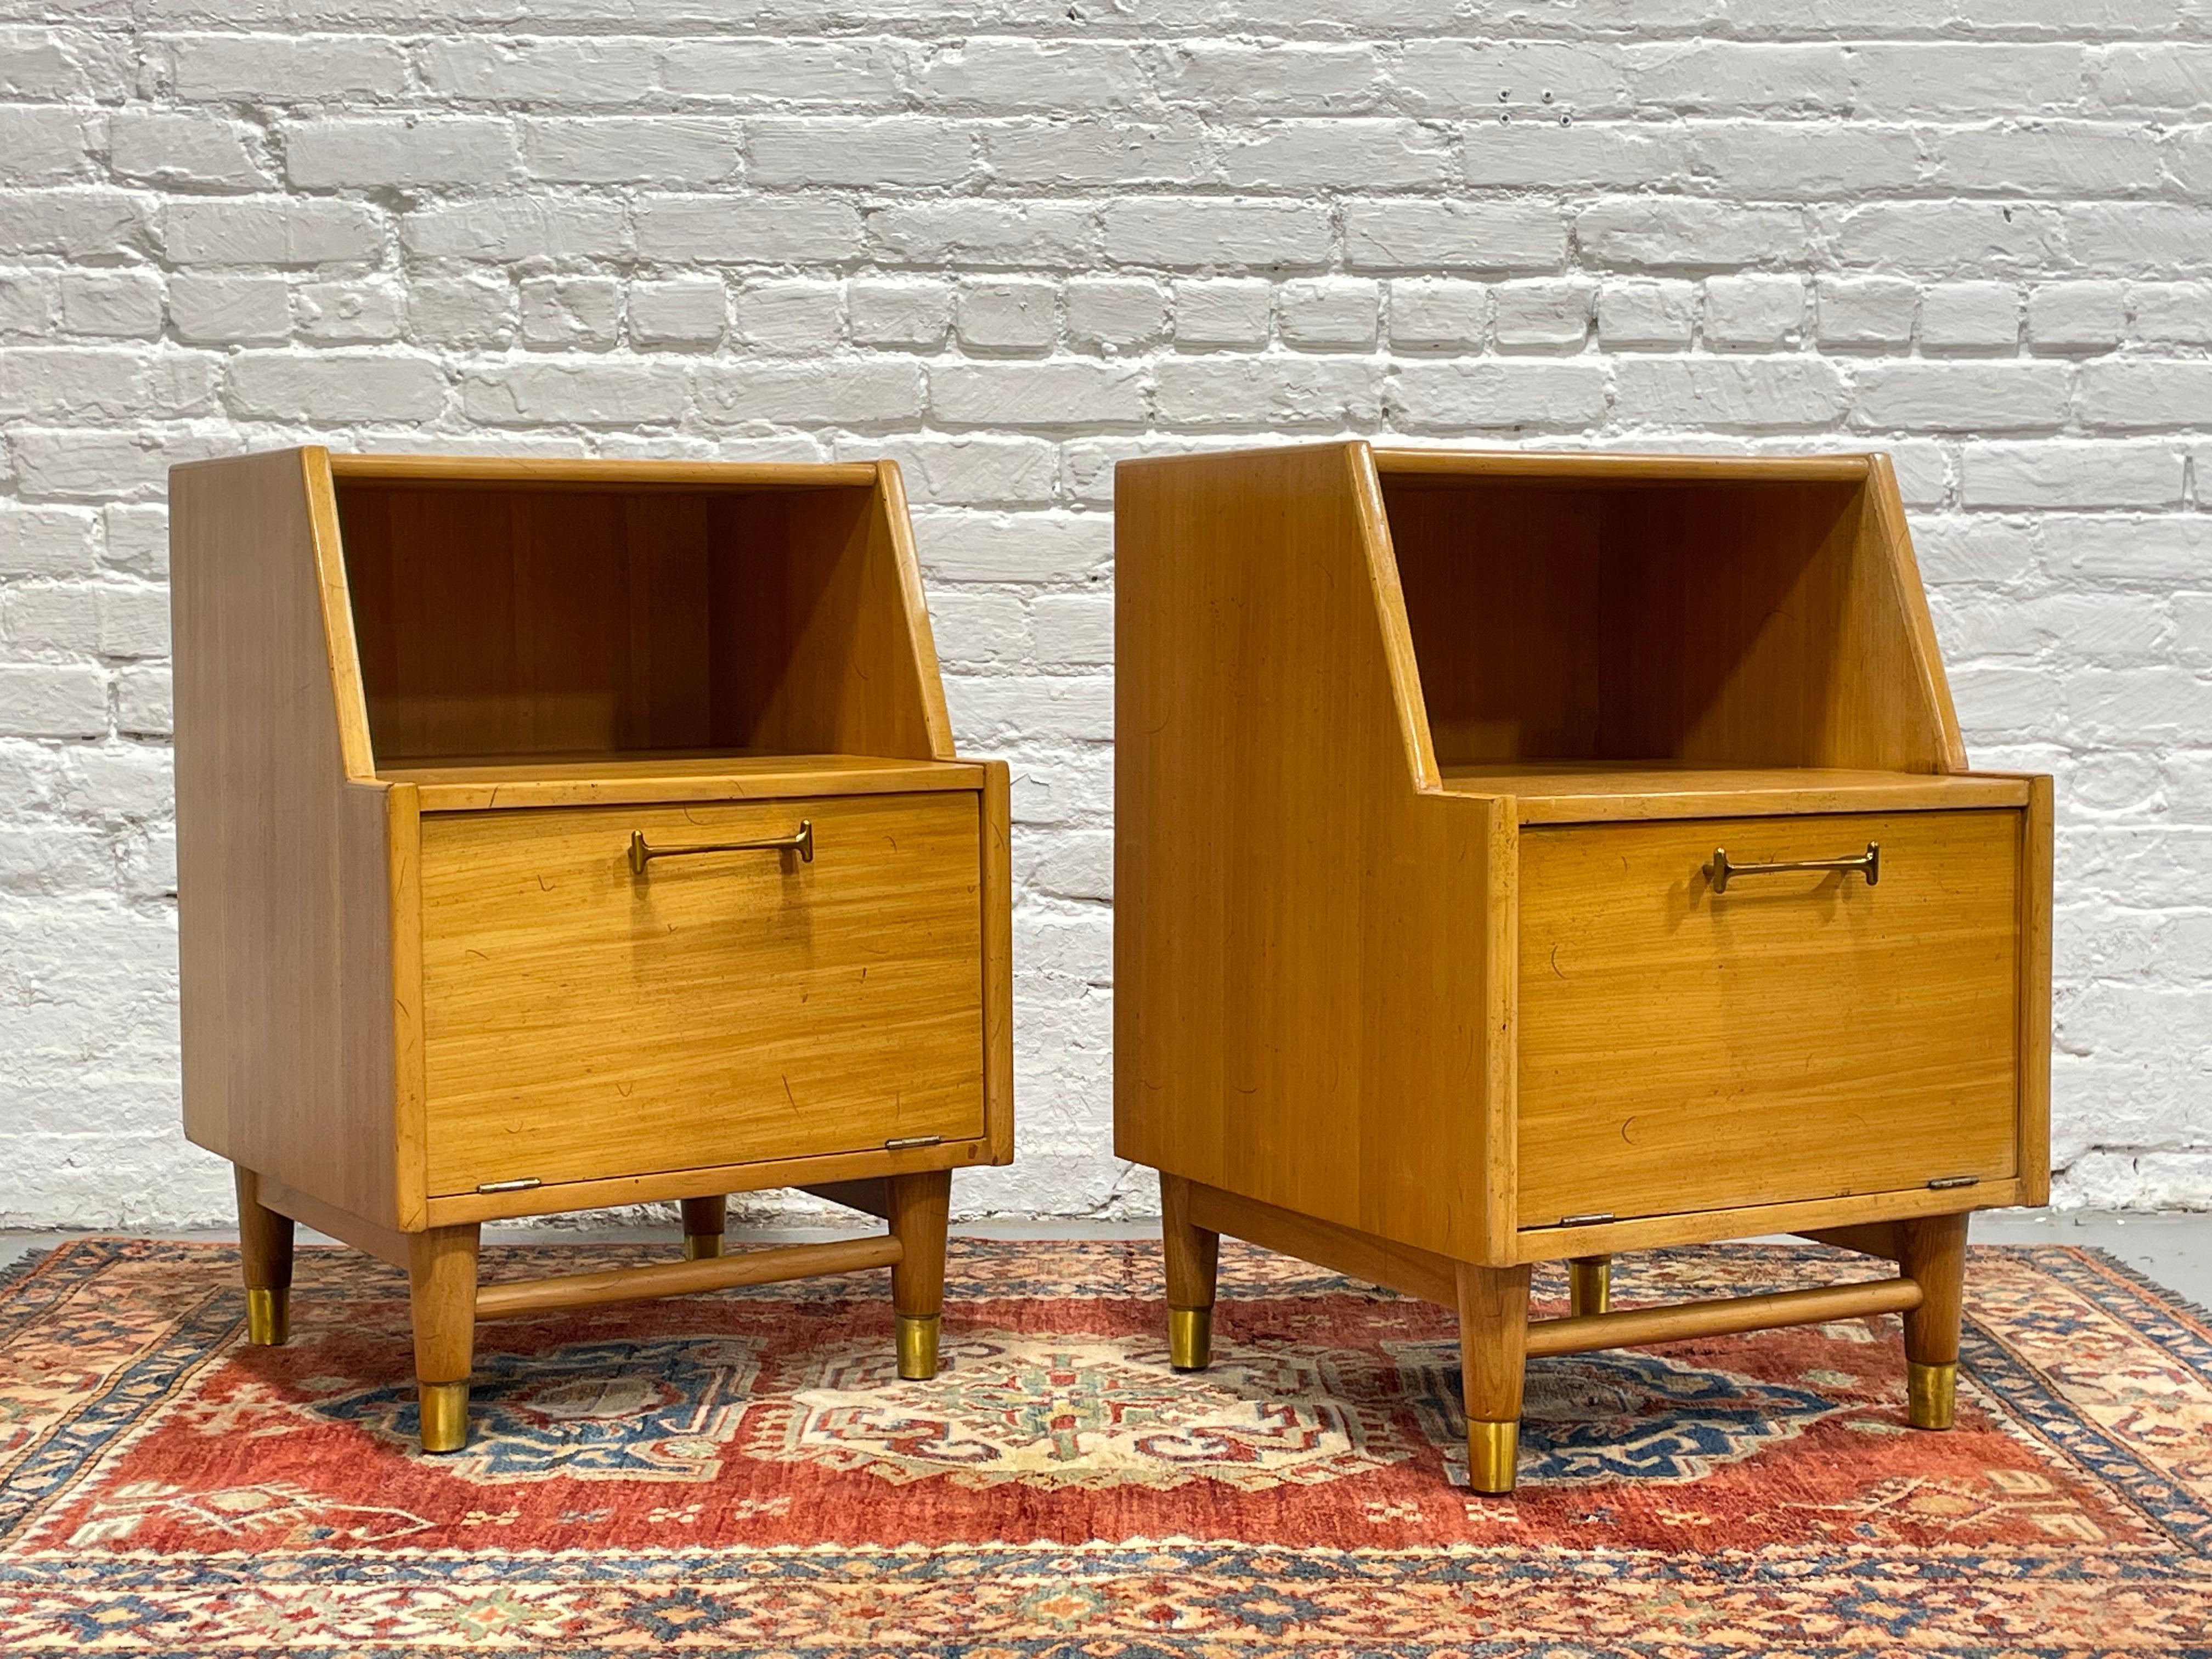 Mid Century Modern Nightstands, designed by Milo Baughman for Drexel, c. 1950’s.  Sleek and minimalist design in a maple finish with angled profile. Loads of storage space for all your bedtime essentials - large hidden cabinet space behind the drop